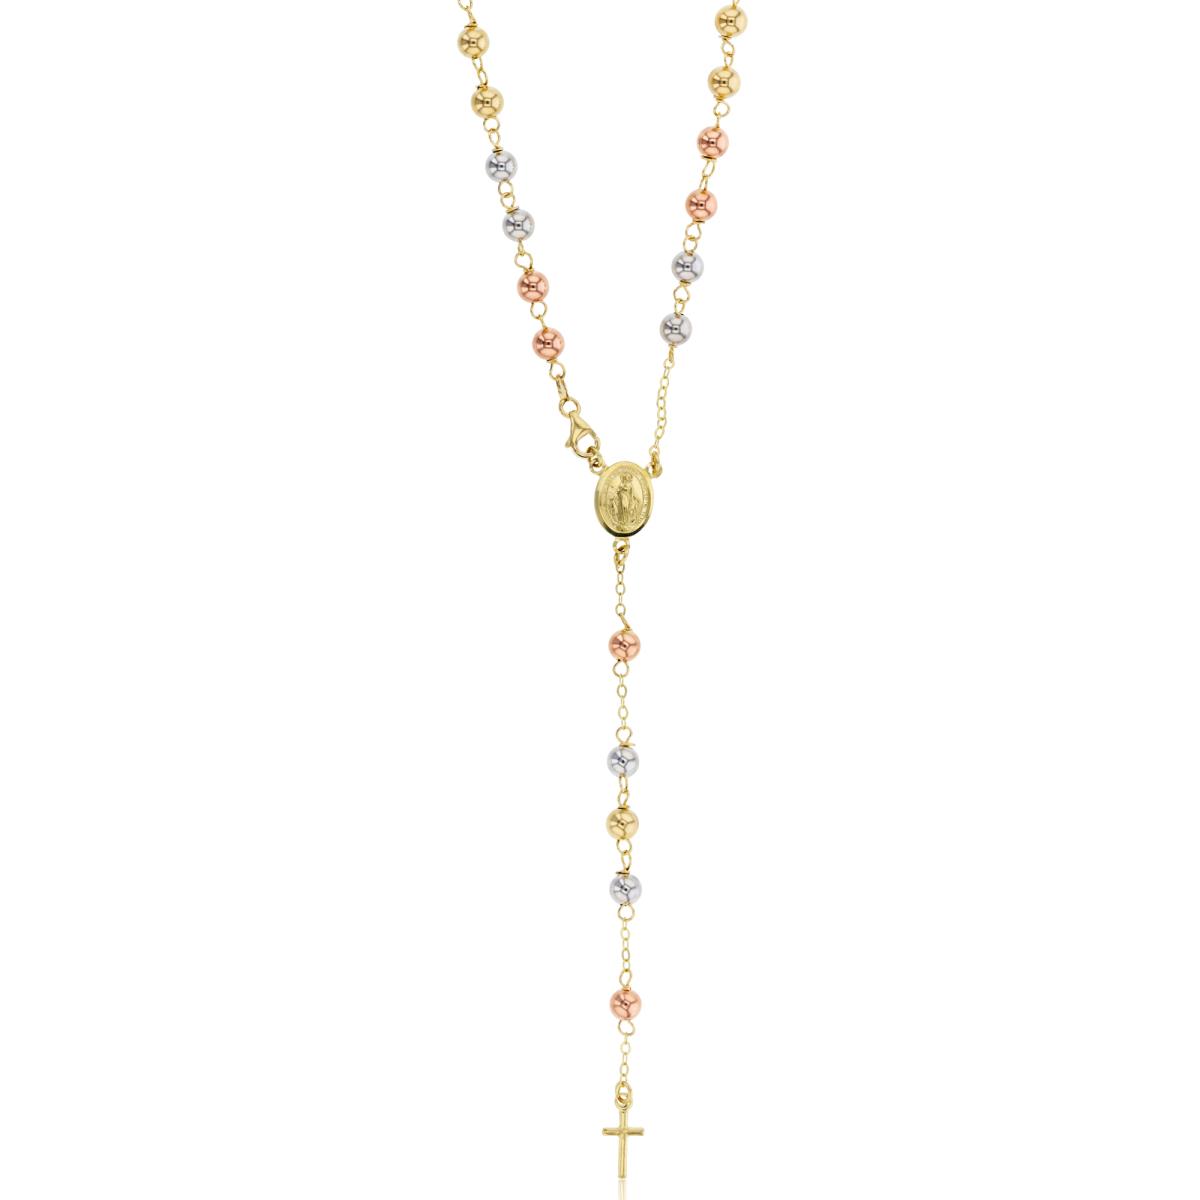 140K Tri-Color Gold Polished 5mm Beads 24" Rosary Necklace